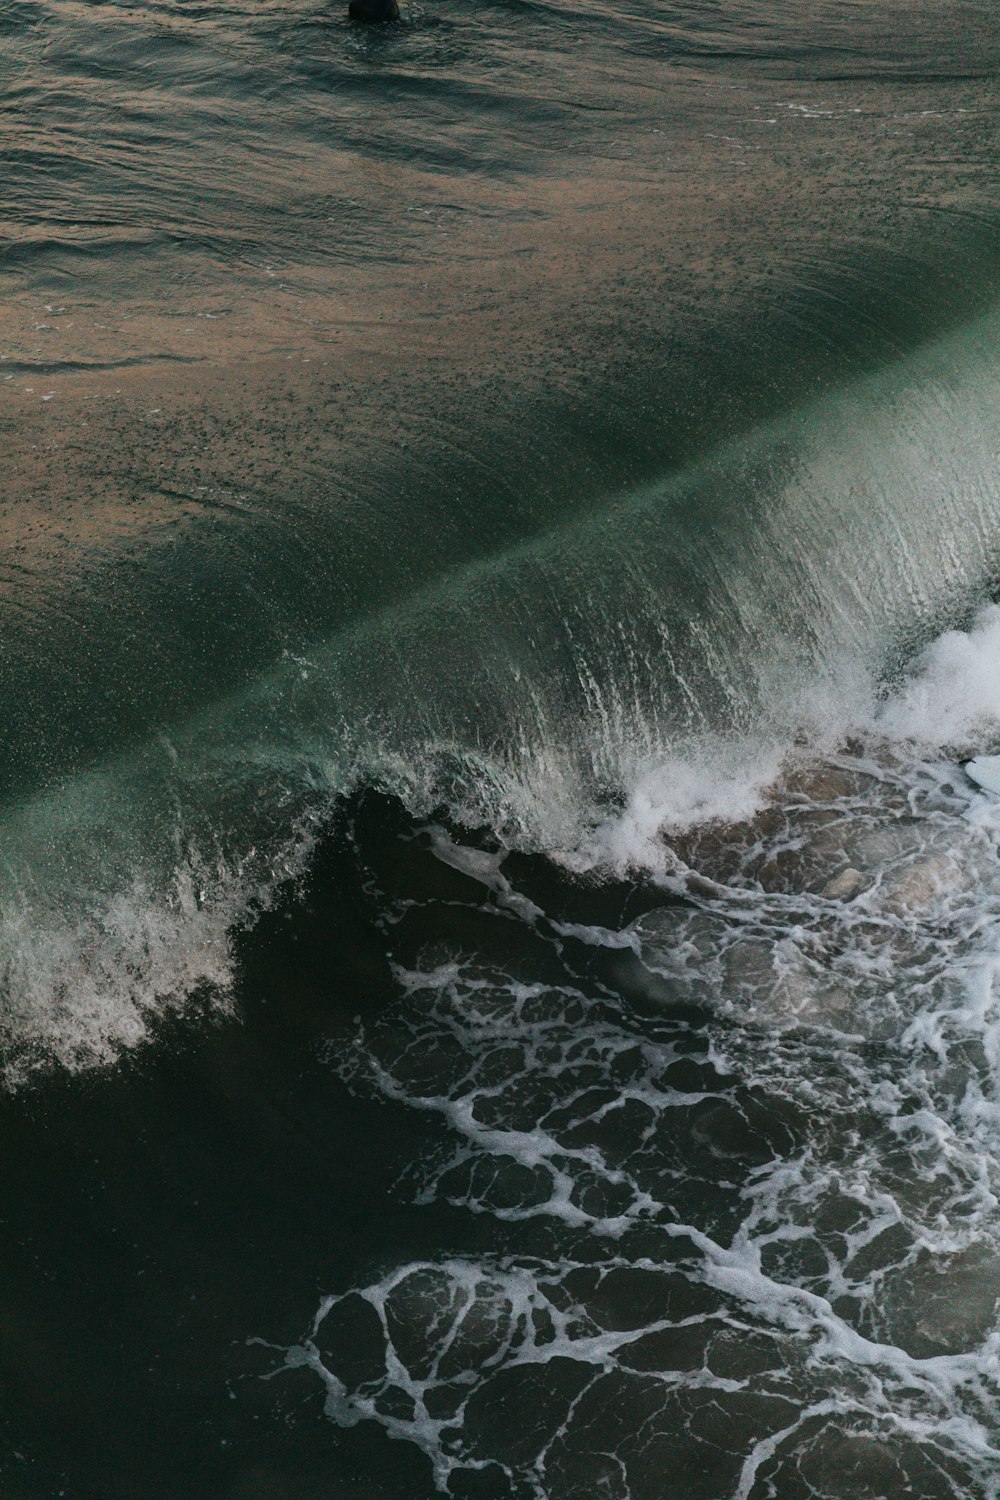 water waves hitting the shore during daytime